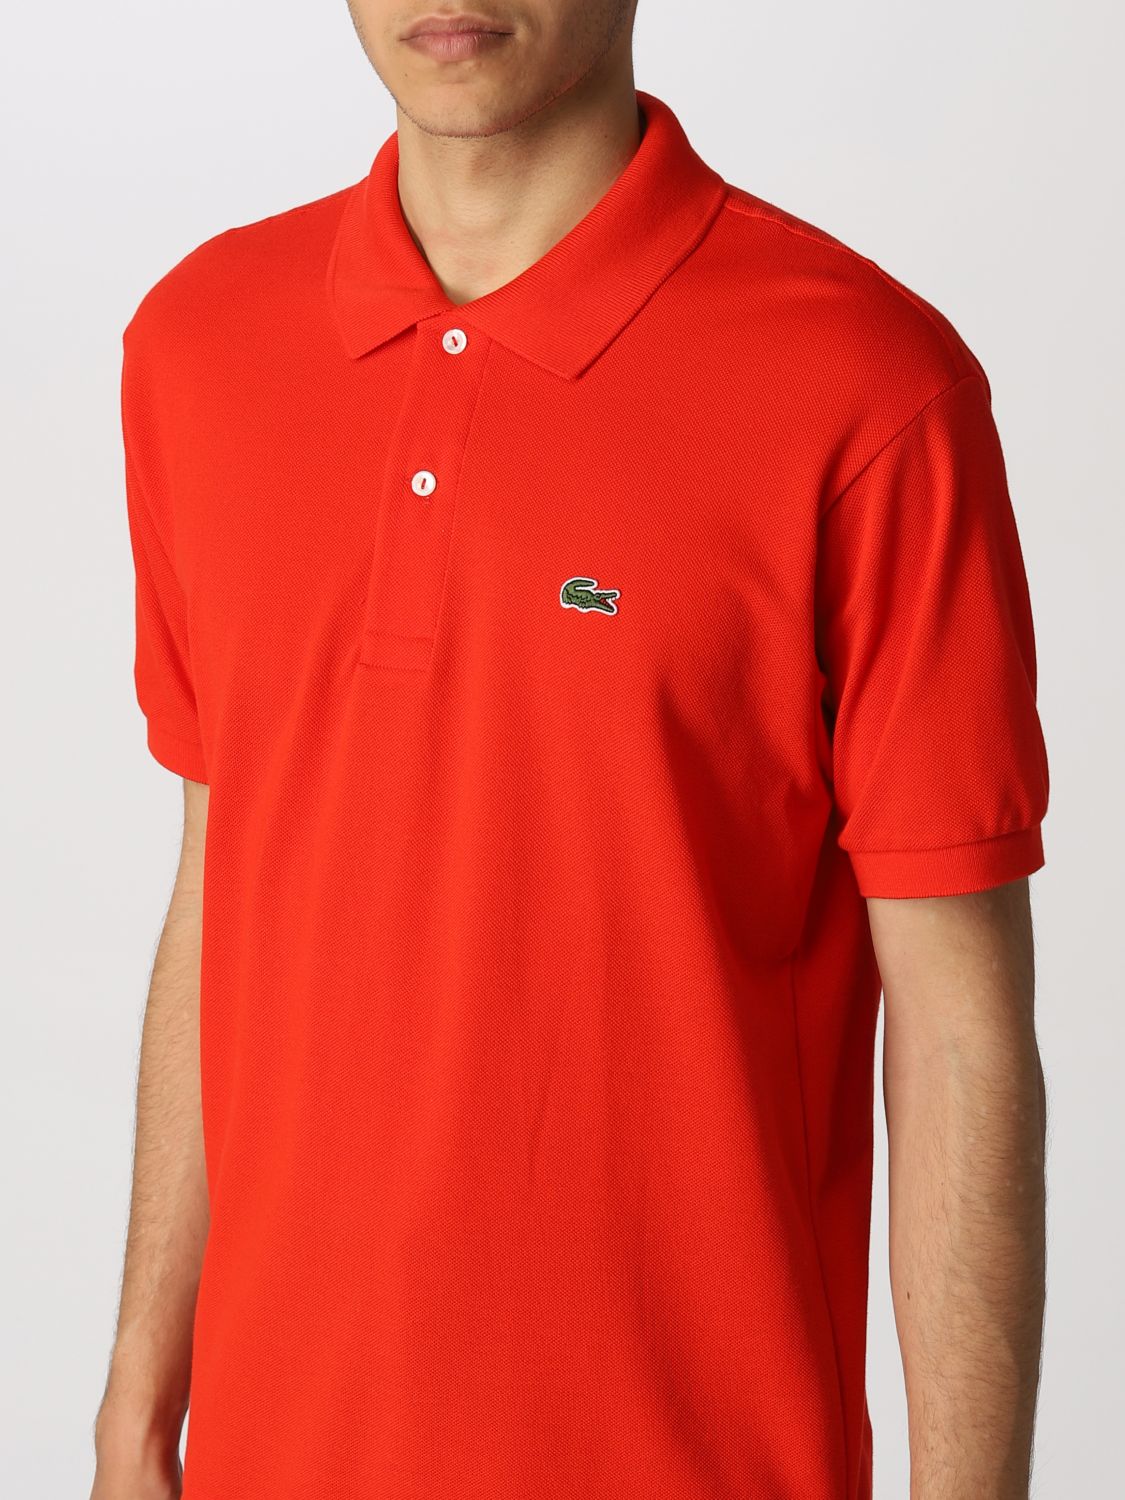 ånd Nautisk . LACOSTE: basic polo shirt with logo - Red | Lacoste polo shirt L1212 online  on GIGLIO.COM